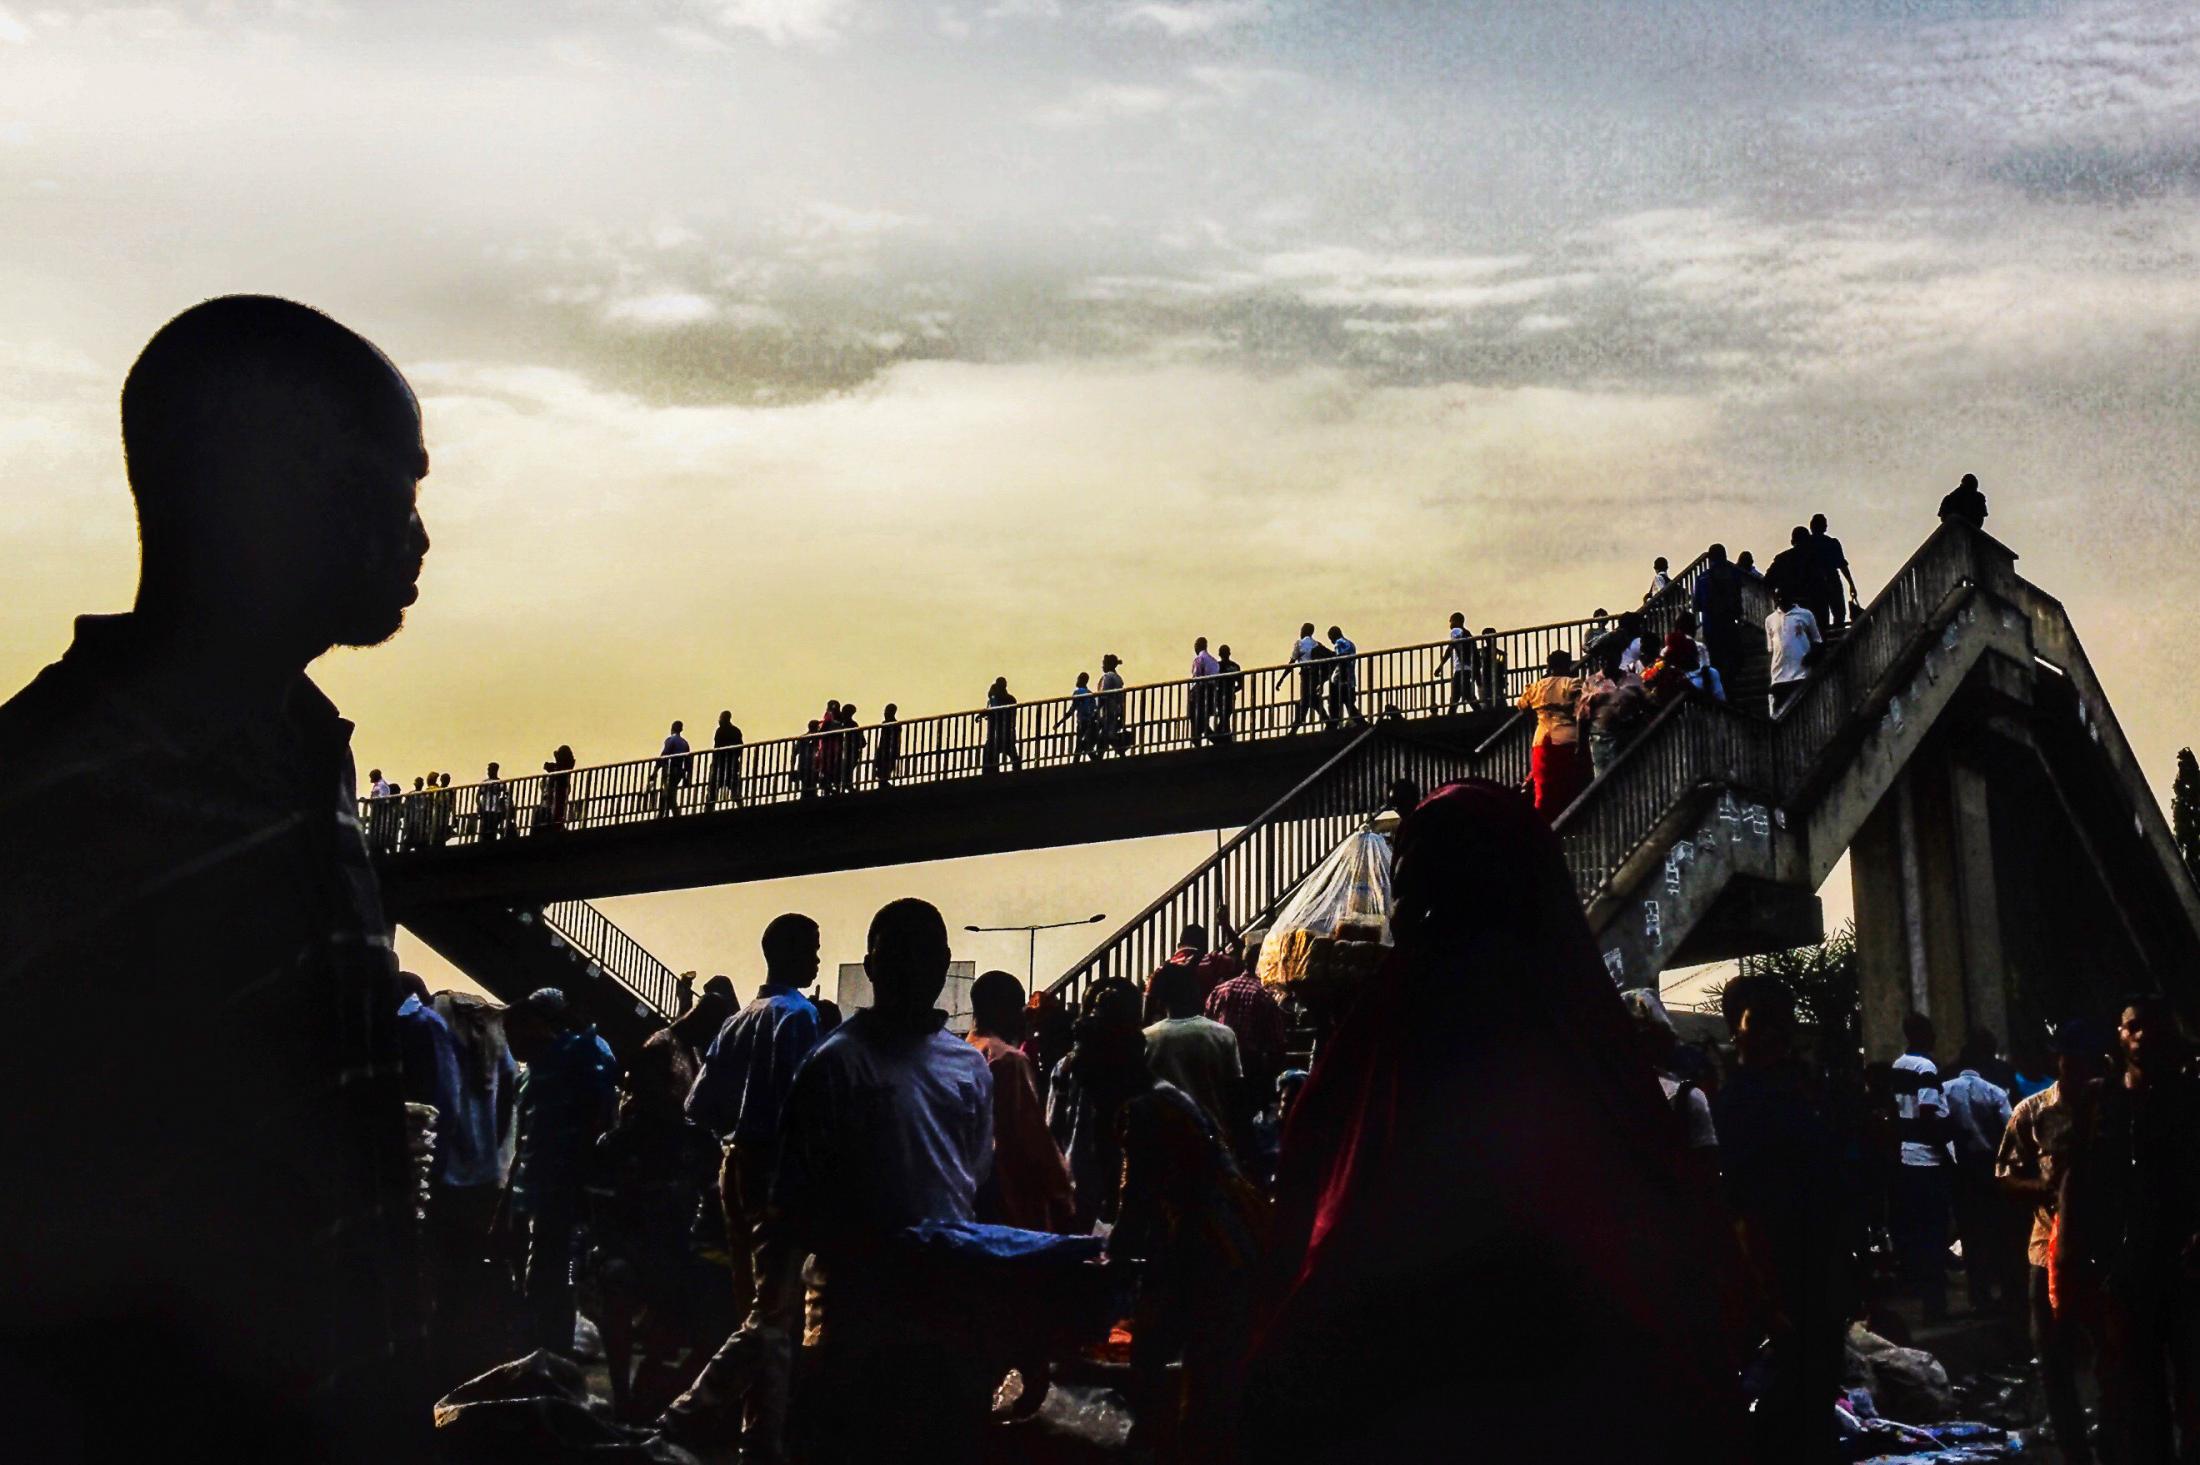 Lagos Street Diary - Processed with VSCO with c1 preset Processed with VSCO...